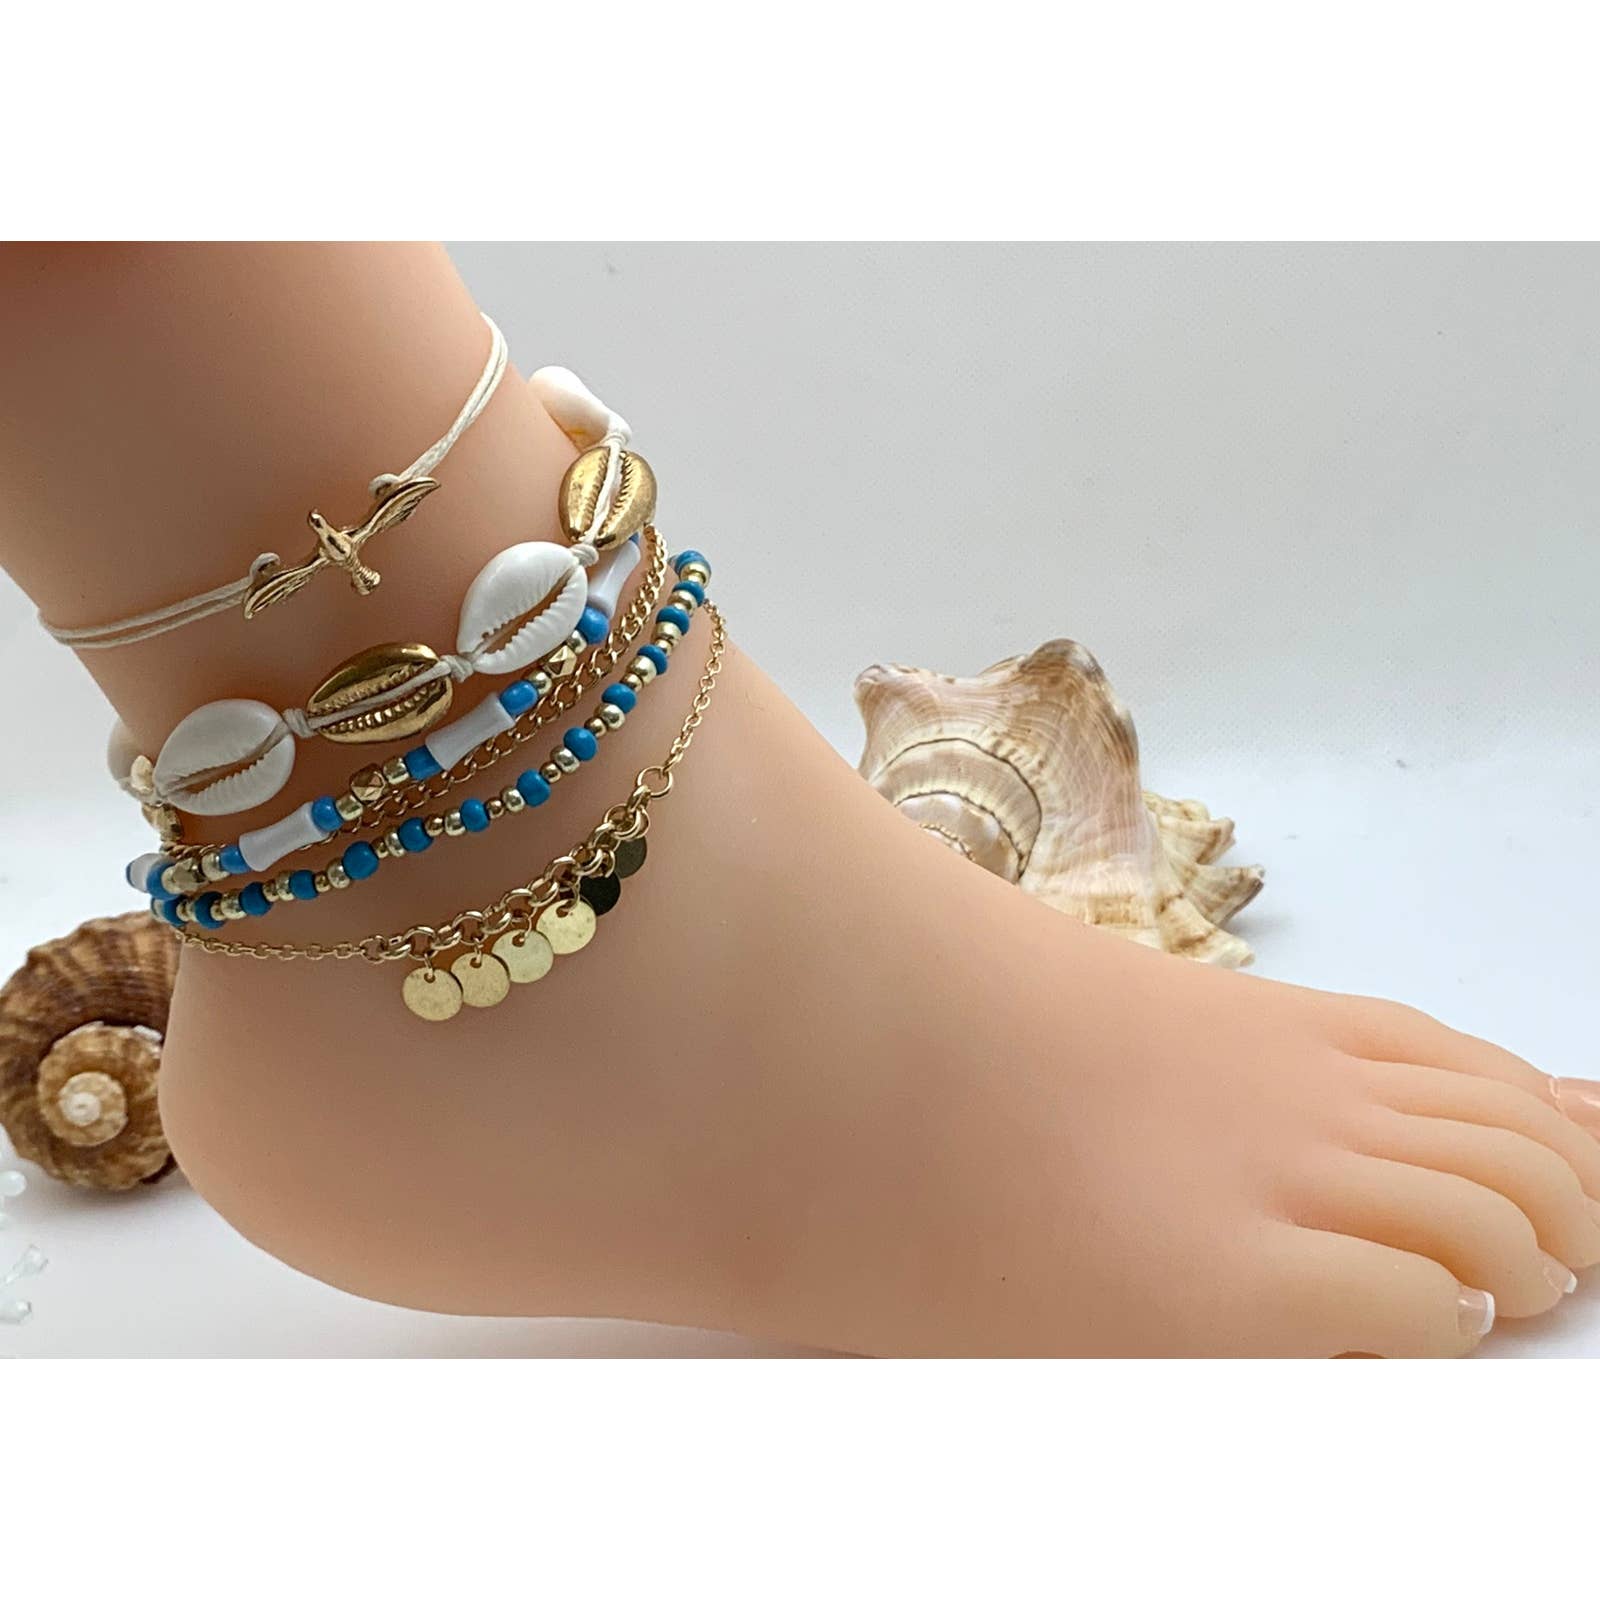 Edary Beach Crystal Anklet Silver Ankle Bracelet with Rhinestone Foot  Accessories for Women and Girls(1PC) : Amazon.in: Jewellery